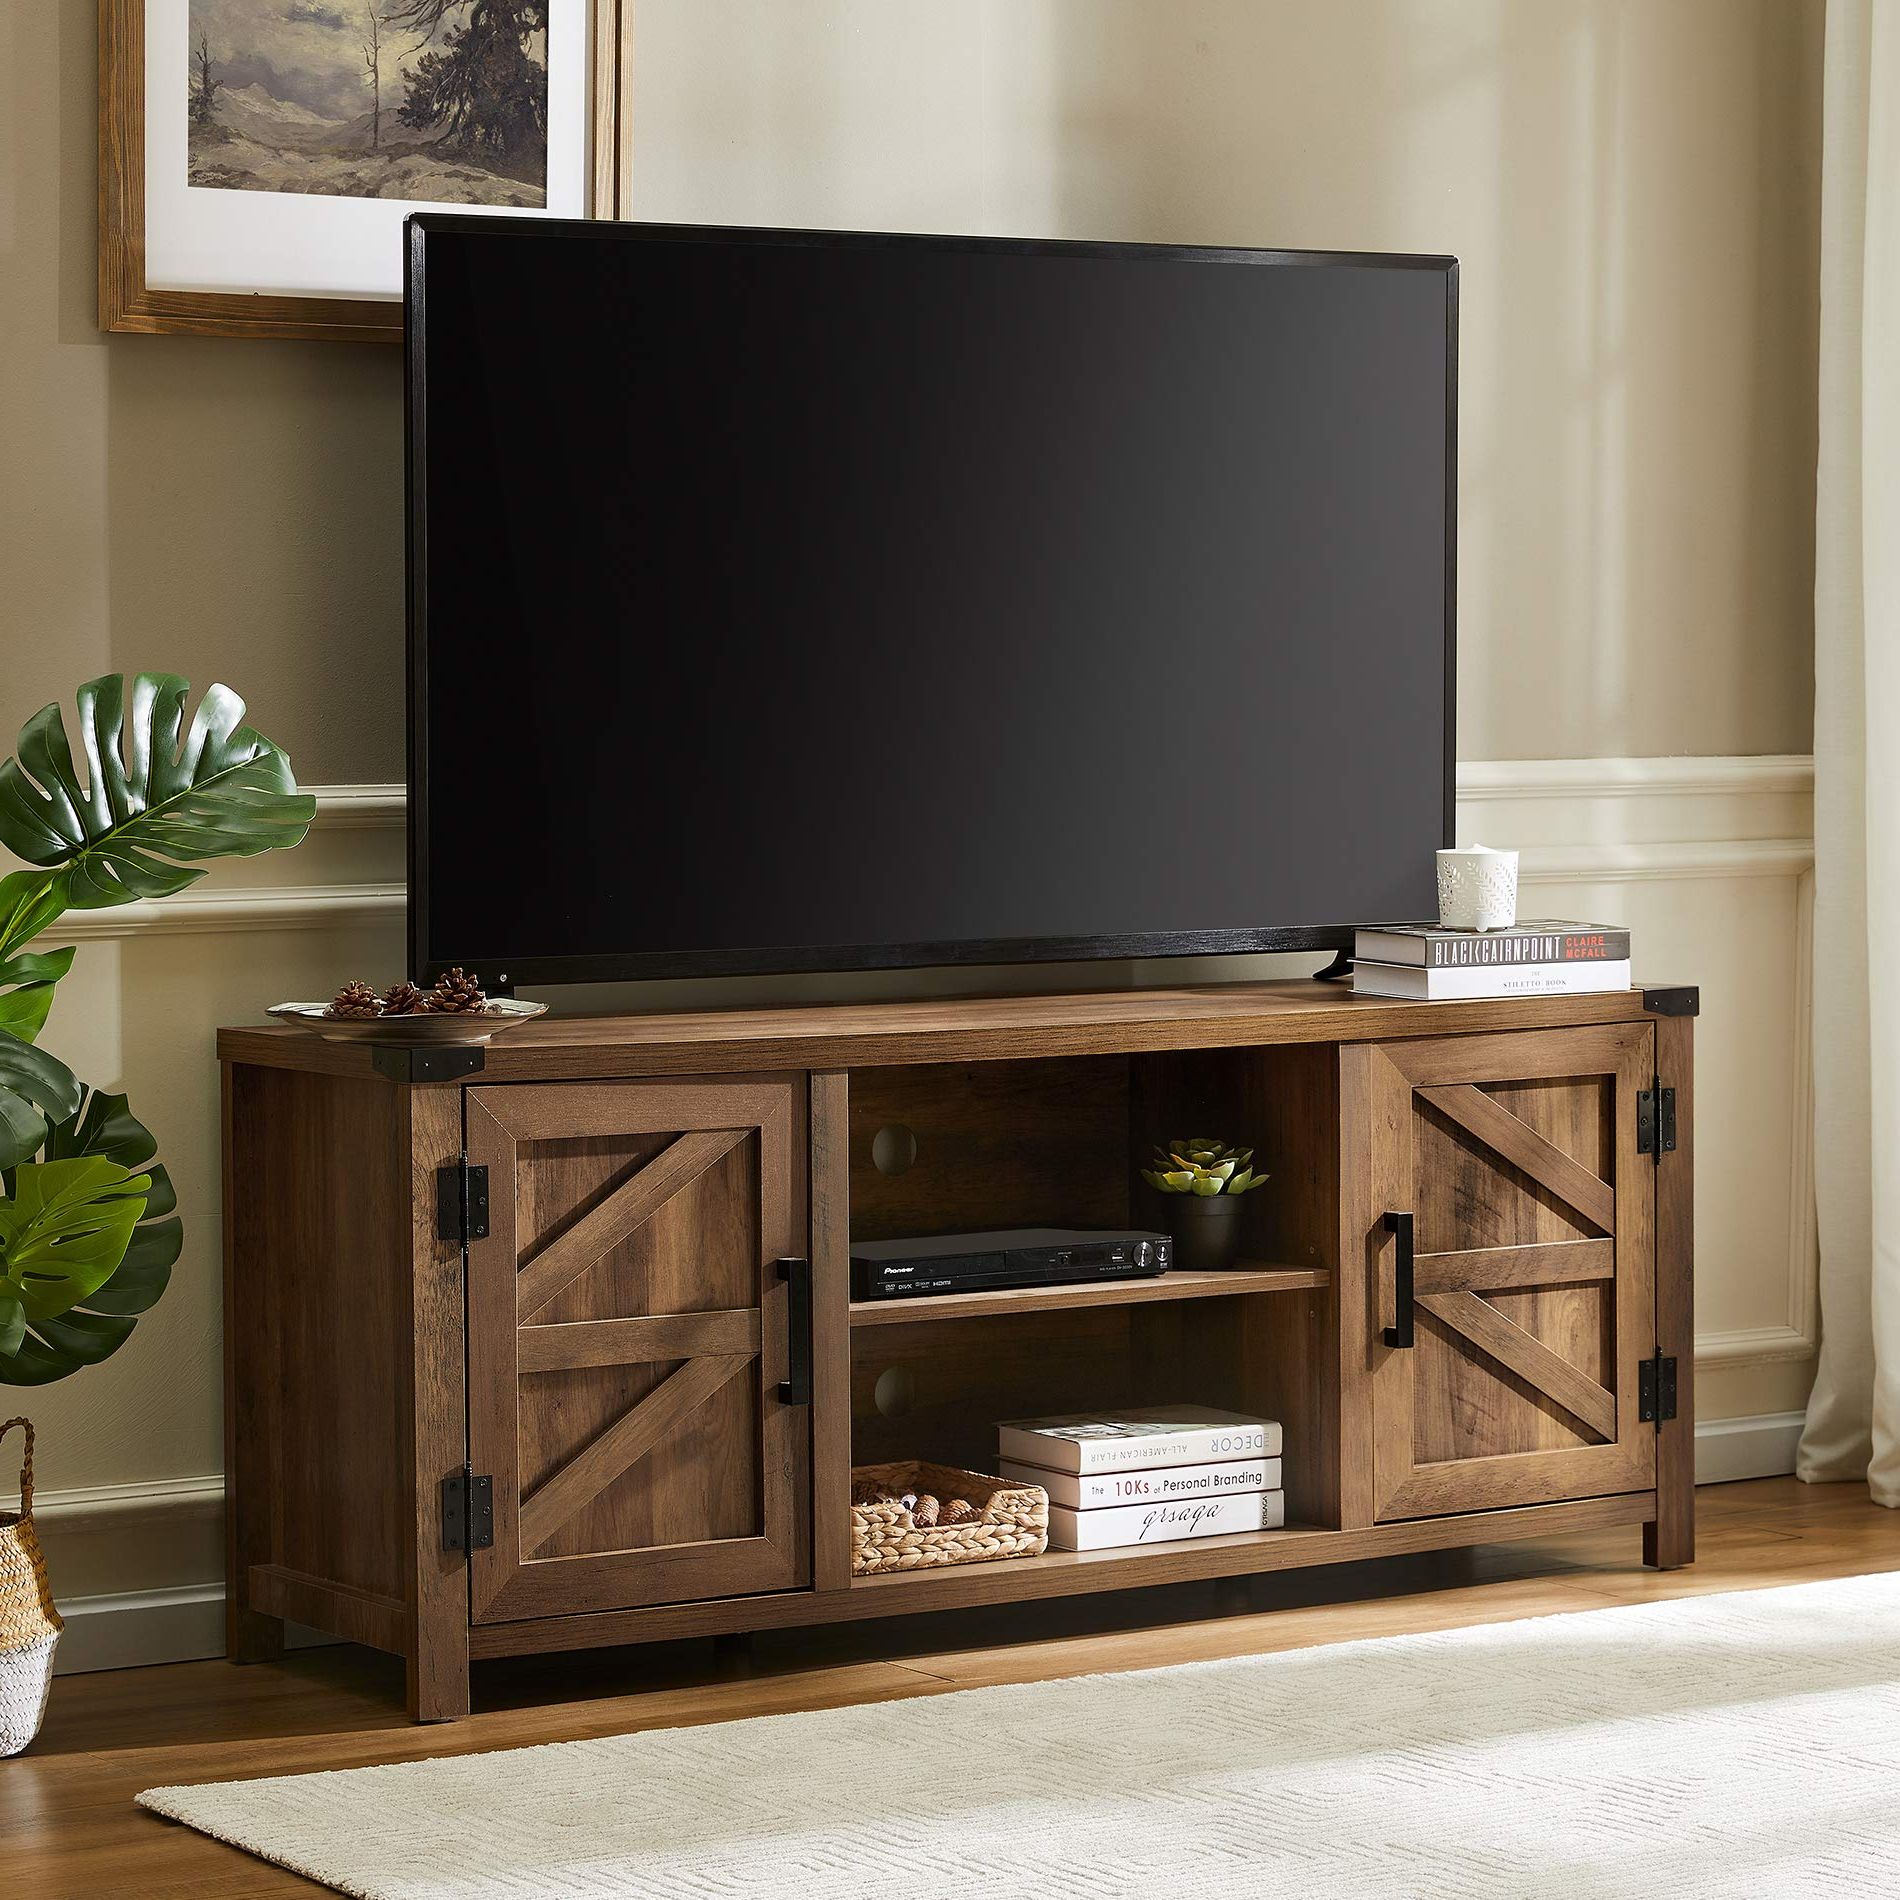 Current Barn Door Media Tv Stands With Buy Wampat Tv Stands For Up To 65 Inch Flat Screen, Wood Tv Unit With (View 9 of 15)